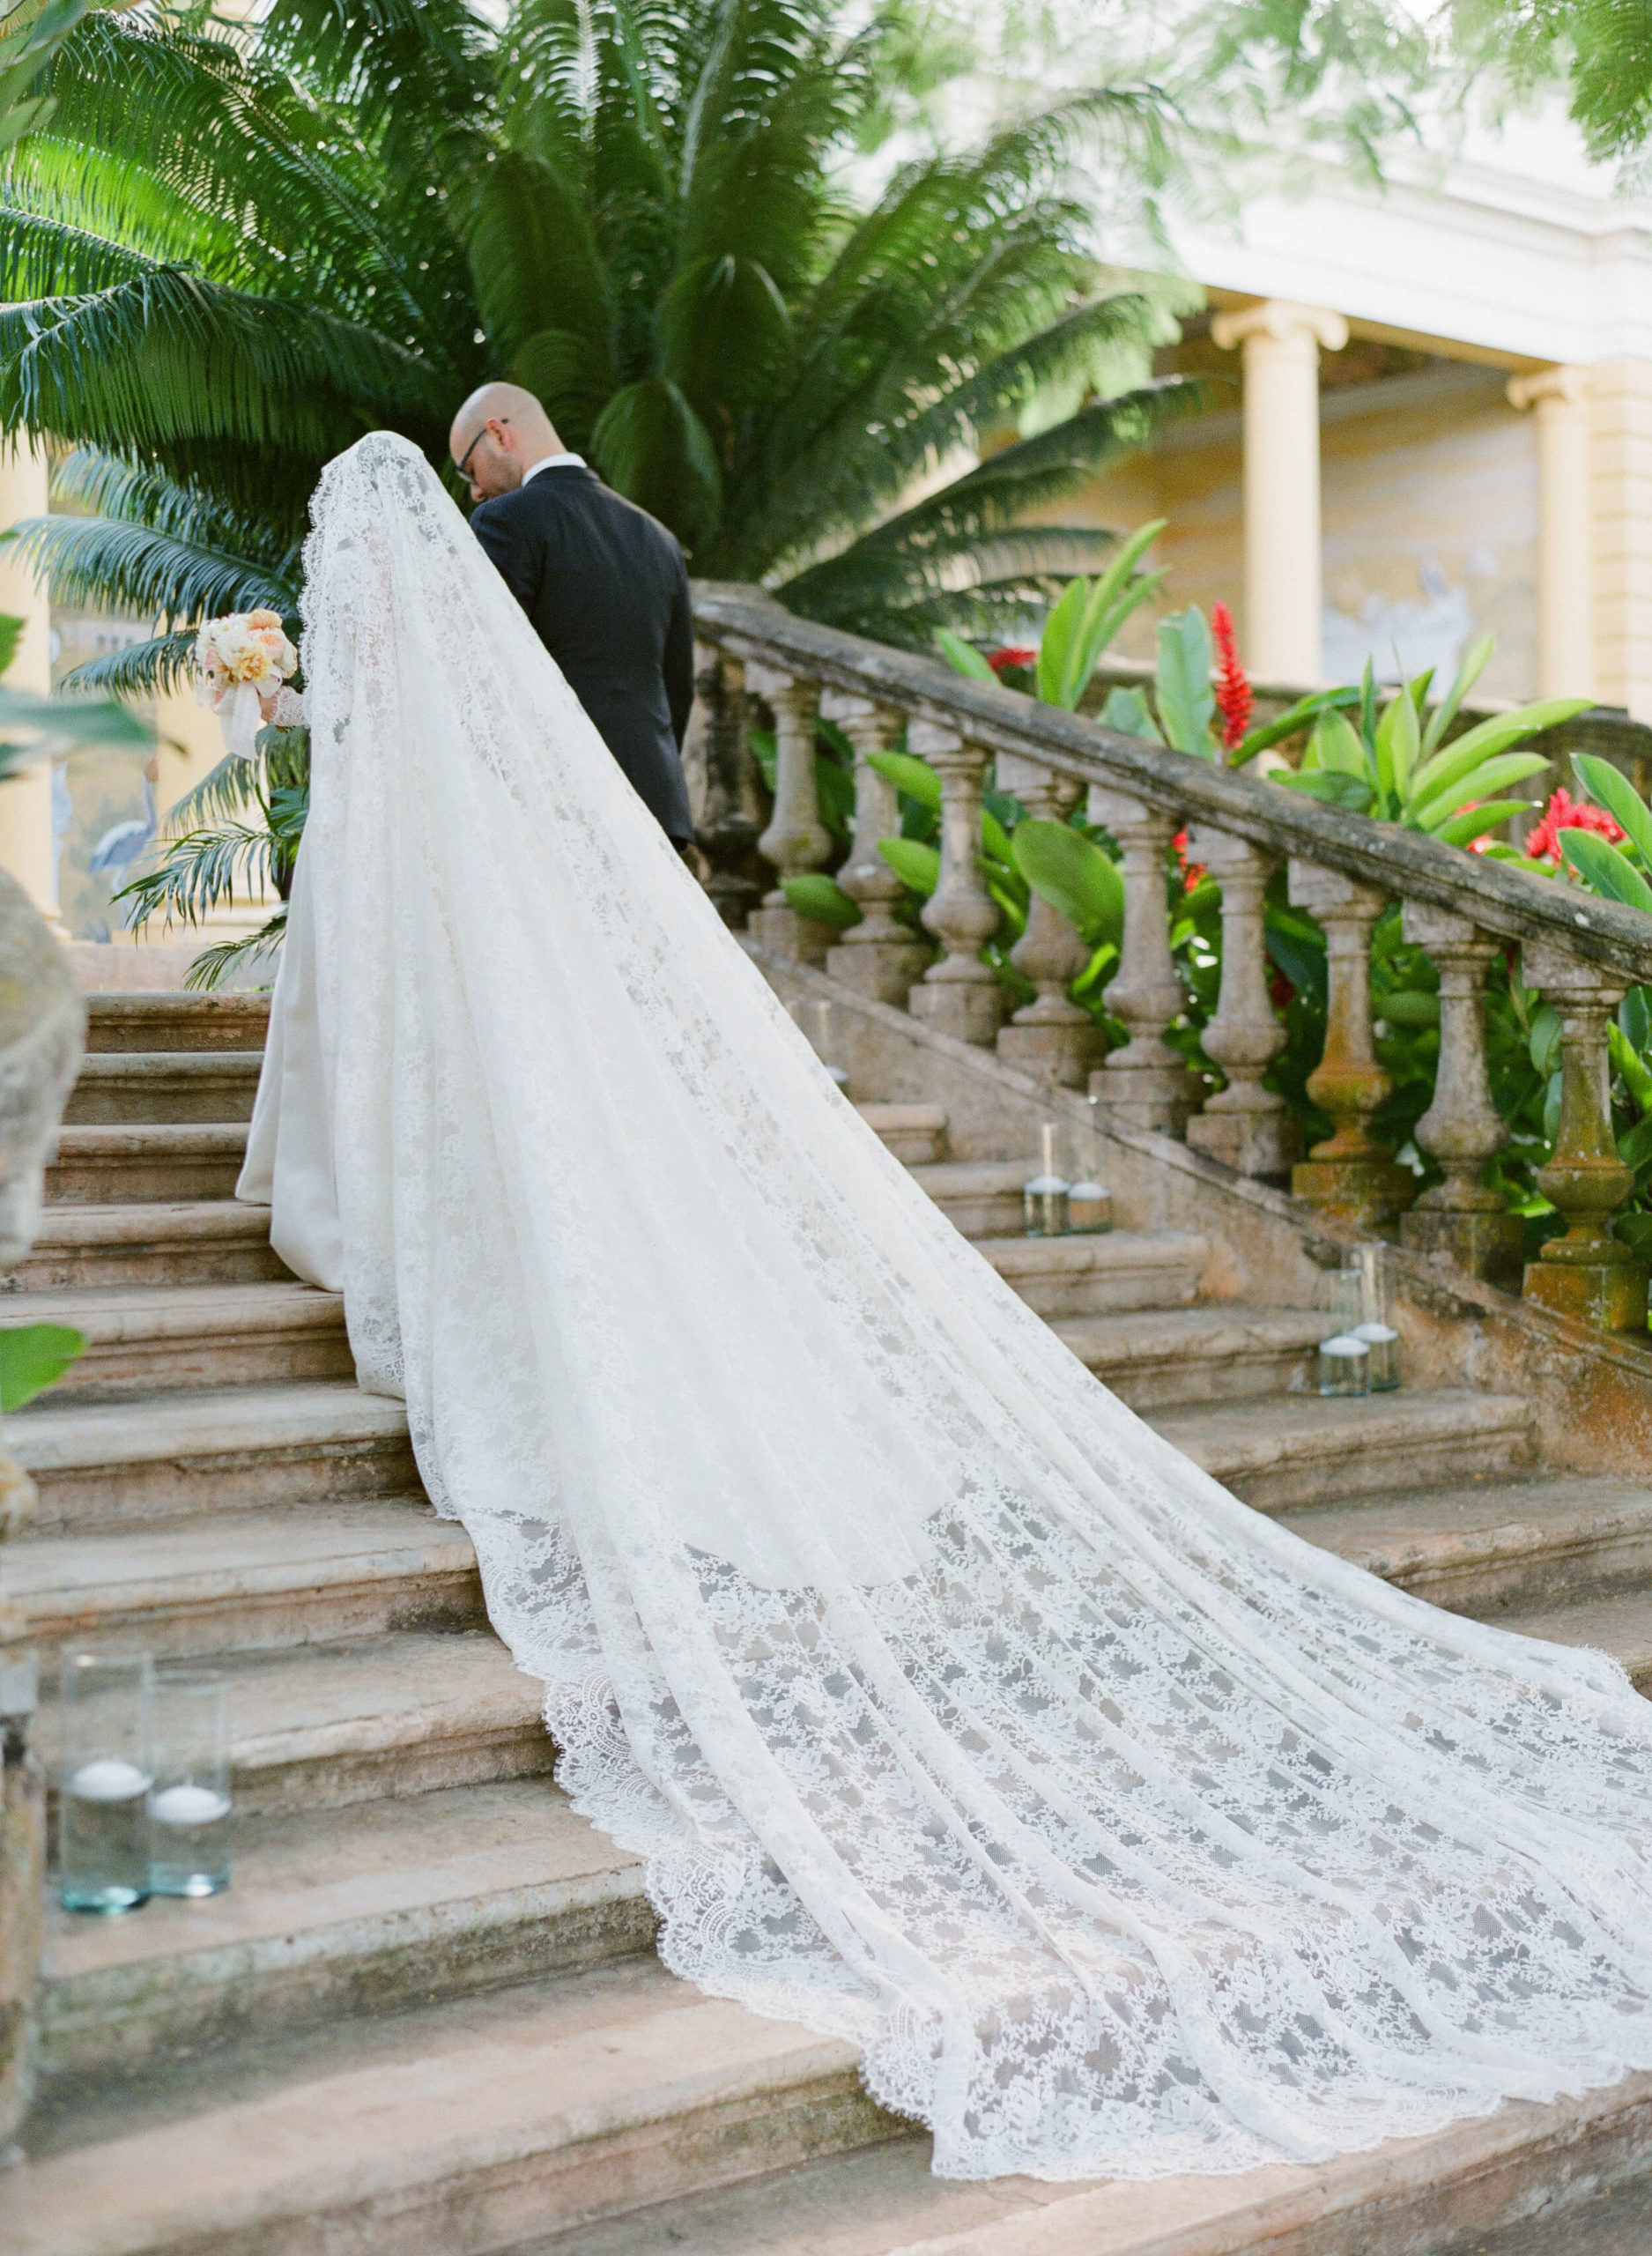 Bride and groom walk up stairs with veil trailing behind